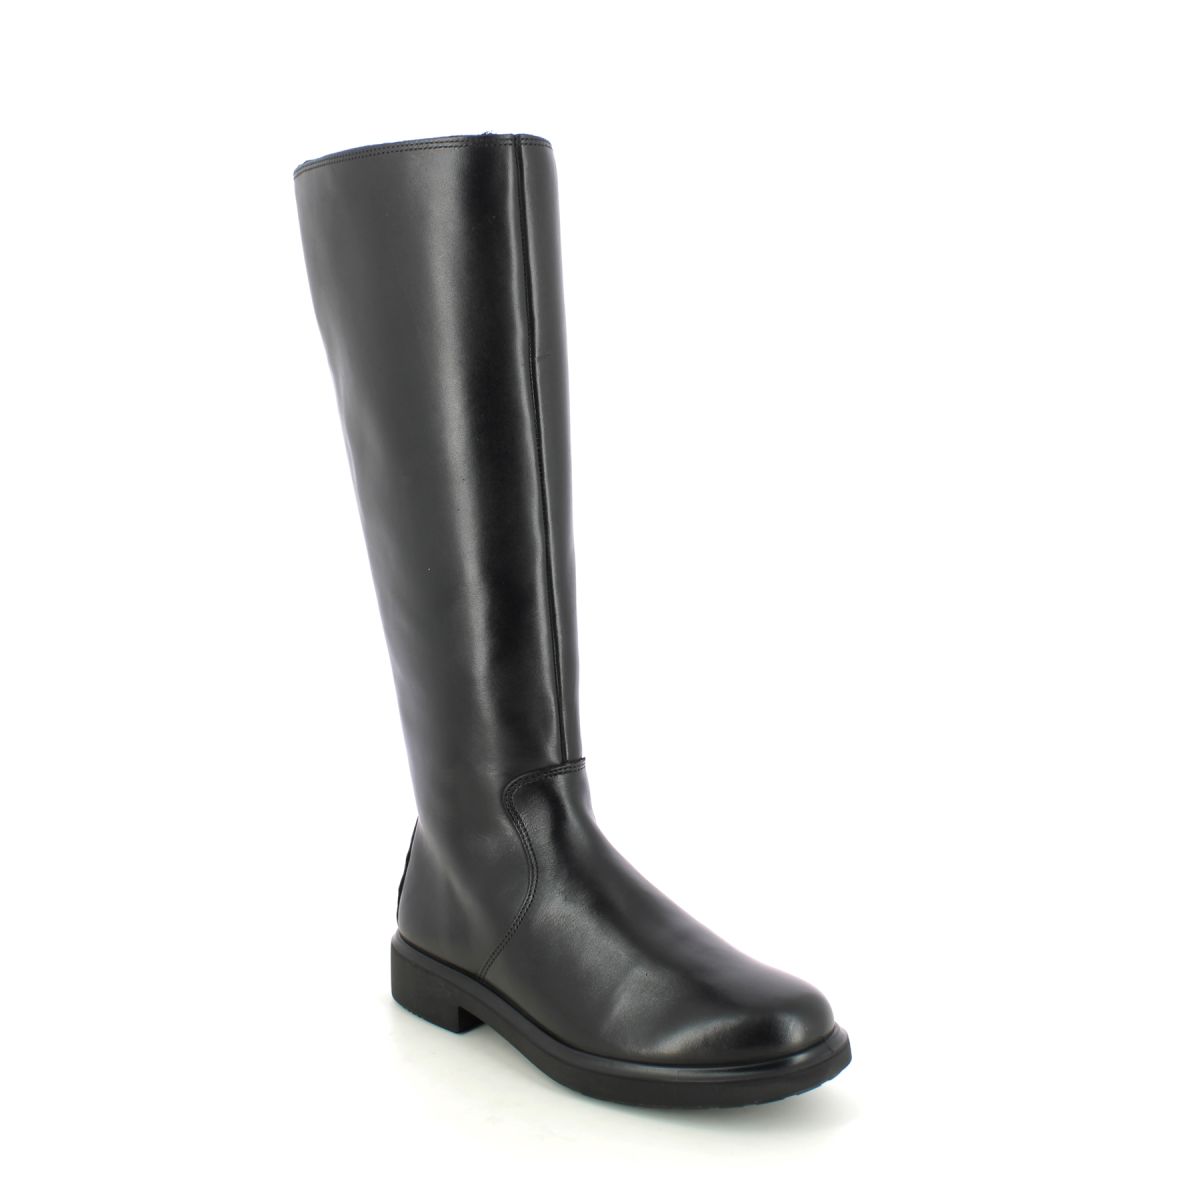 ECCO Amsterdam Metropole Tex Black leather Womens knee-high boots 222023-01001 in a Plain Leather in Size 41